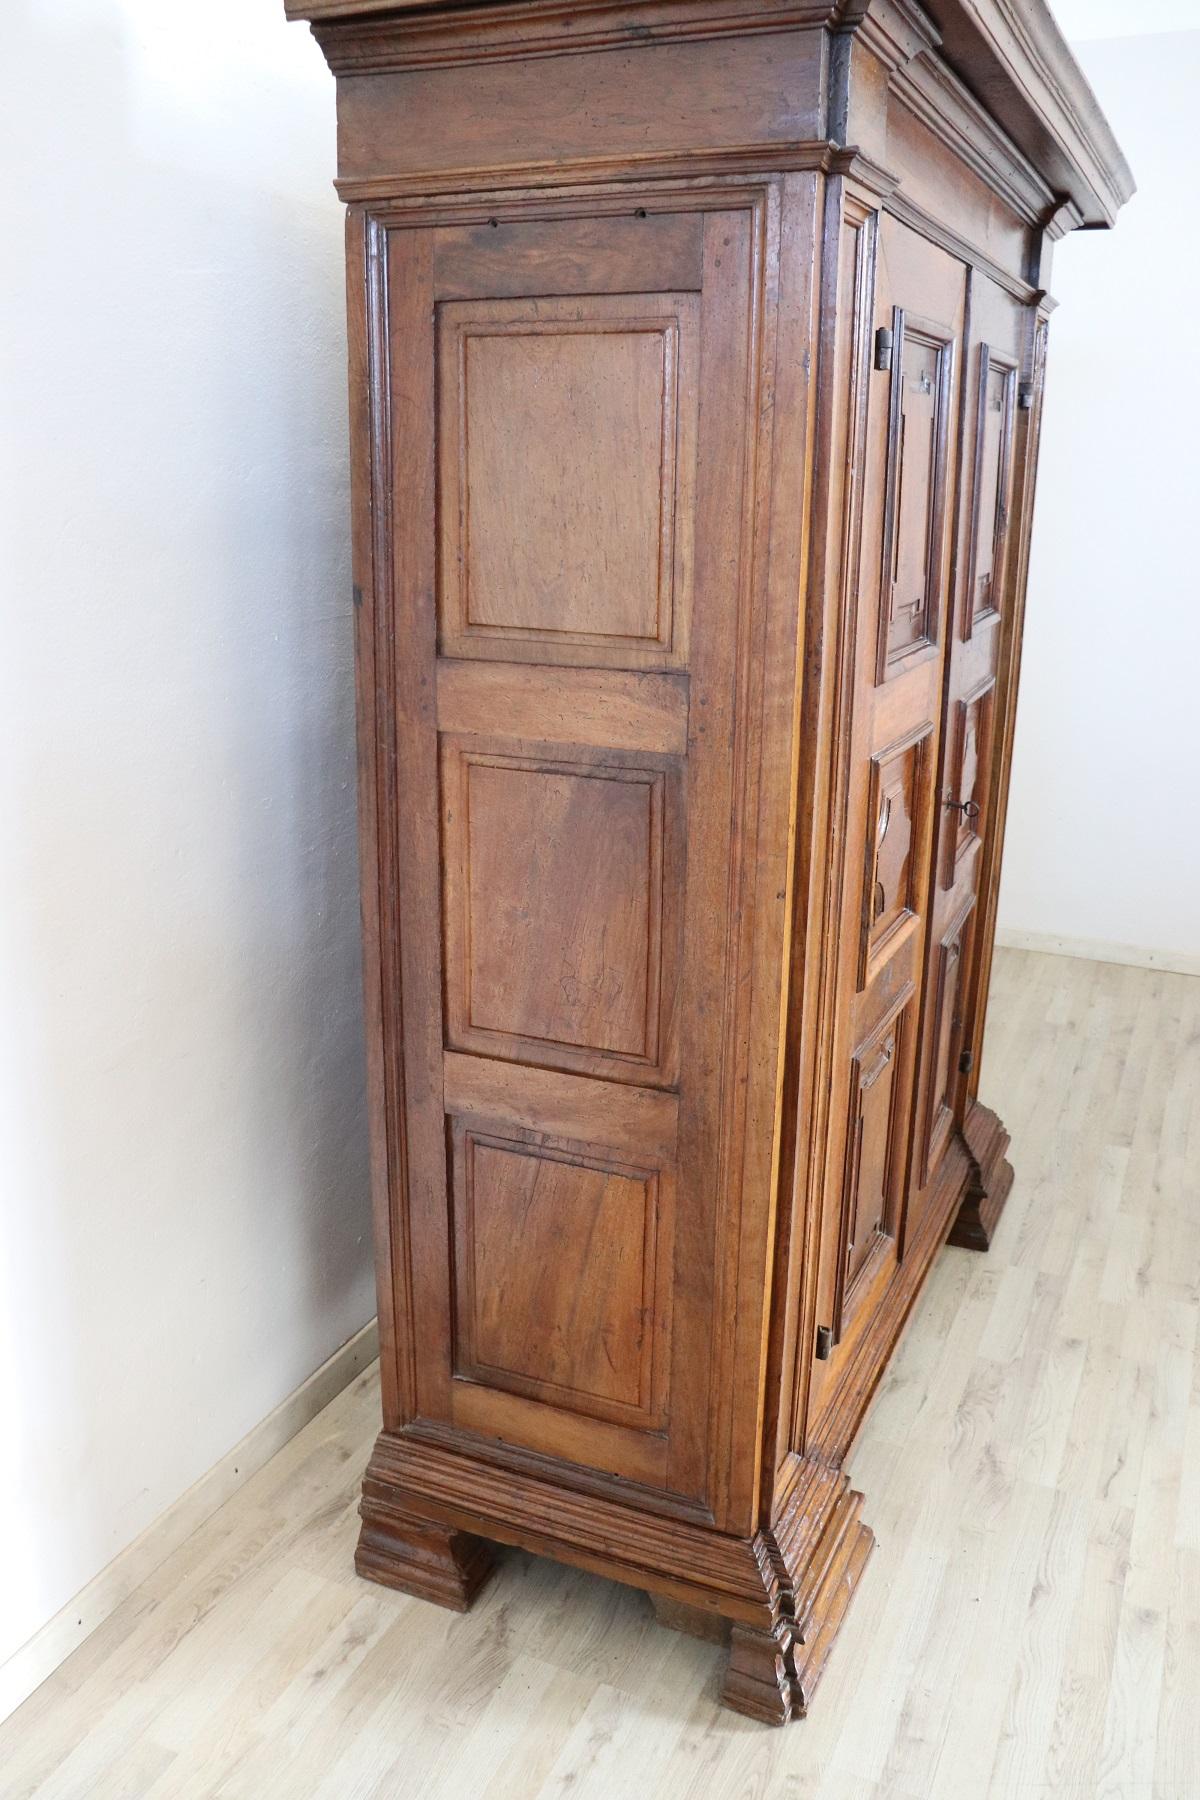 Italian Early 17th Century Louis XIV Walnut Hand Carved Antique Wardrobe or Armoire